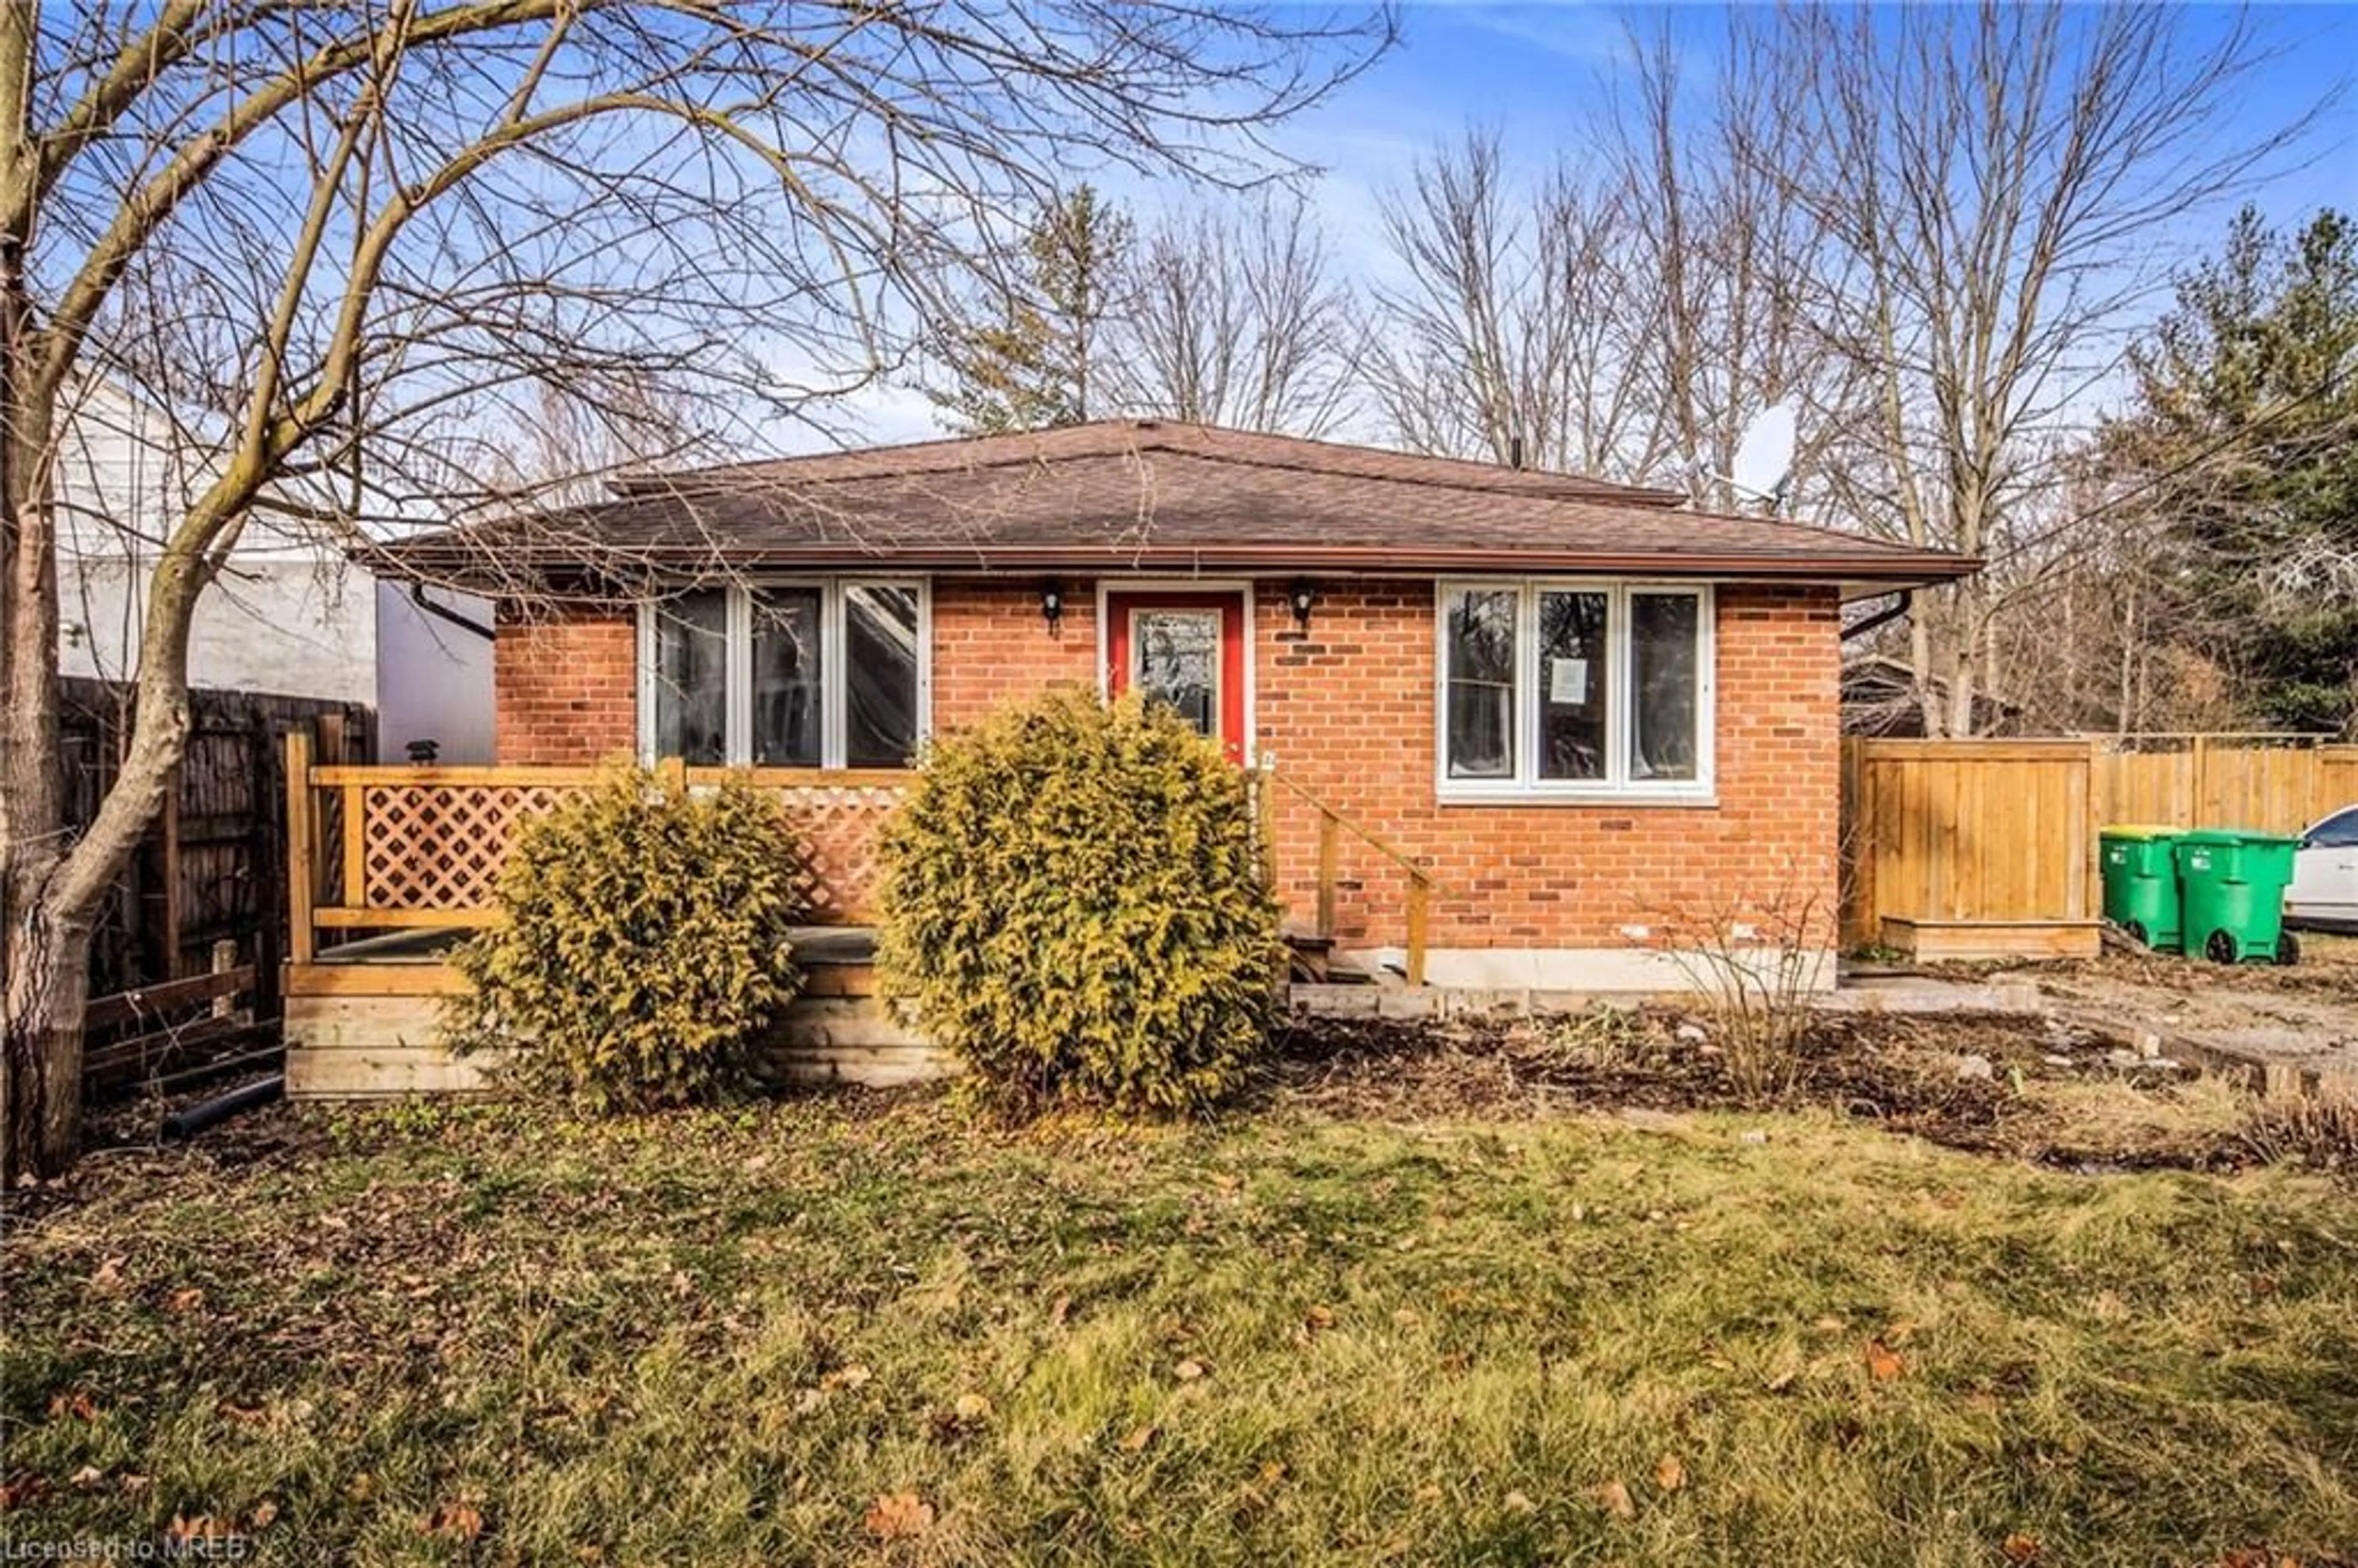 Home with brick exterior material for 229 Hannah St, Wardsville Ontario N0L 2N0